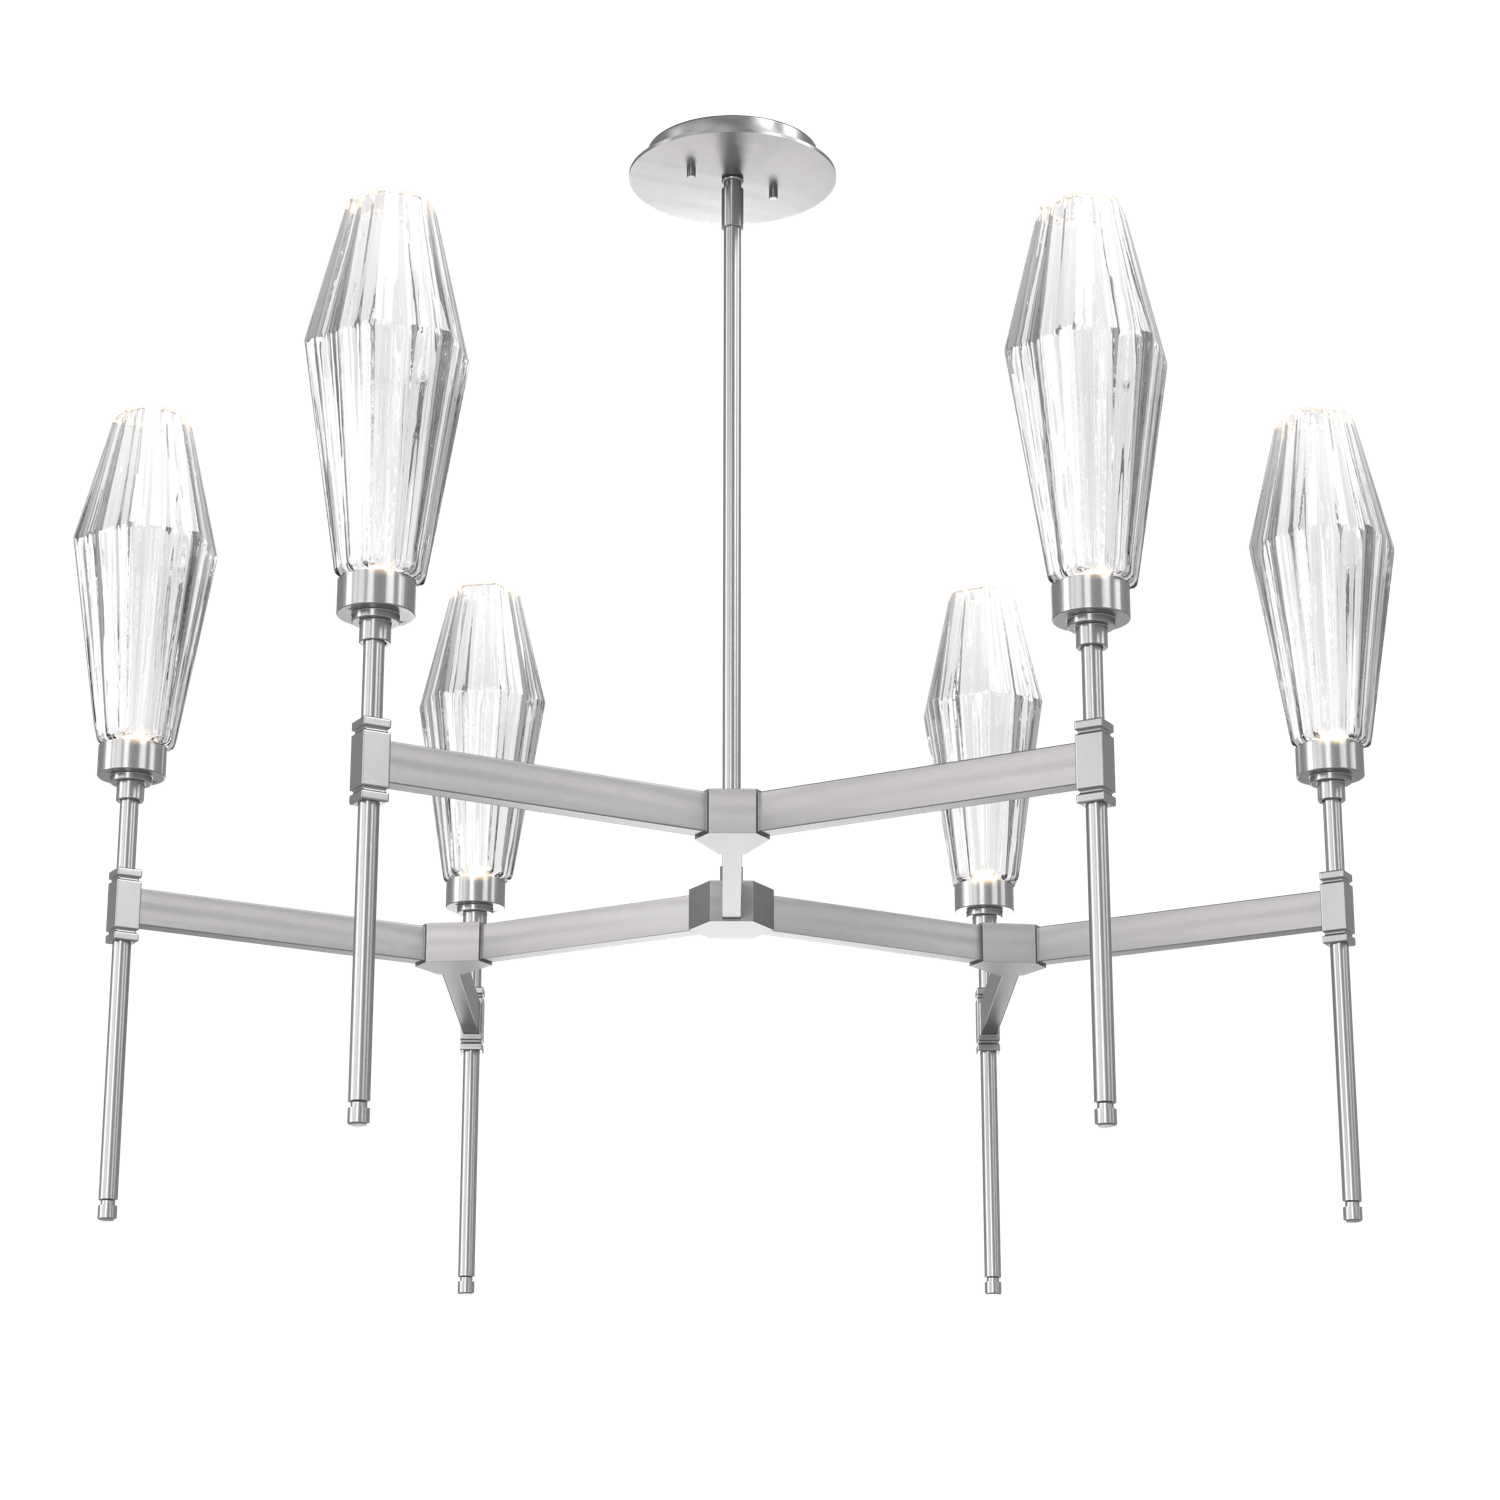 CHB0049-37-SN-RC-Hammerton-Studio-Aalto-37-inch-round-belvedere-chandelier-with-satin-nickel-finish-and-optic-ribbed-clear-glass-shades-and-LED-lamping